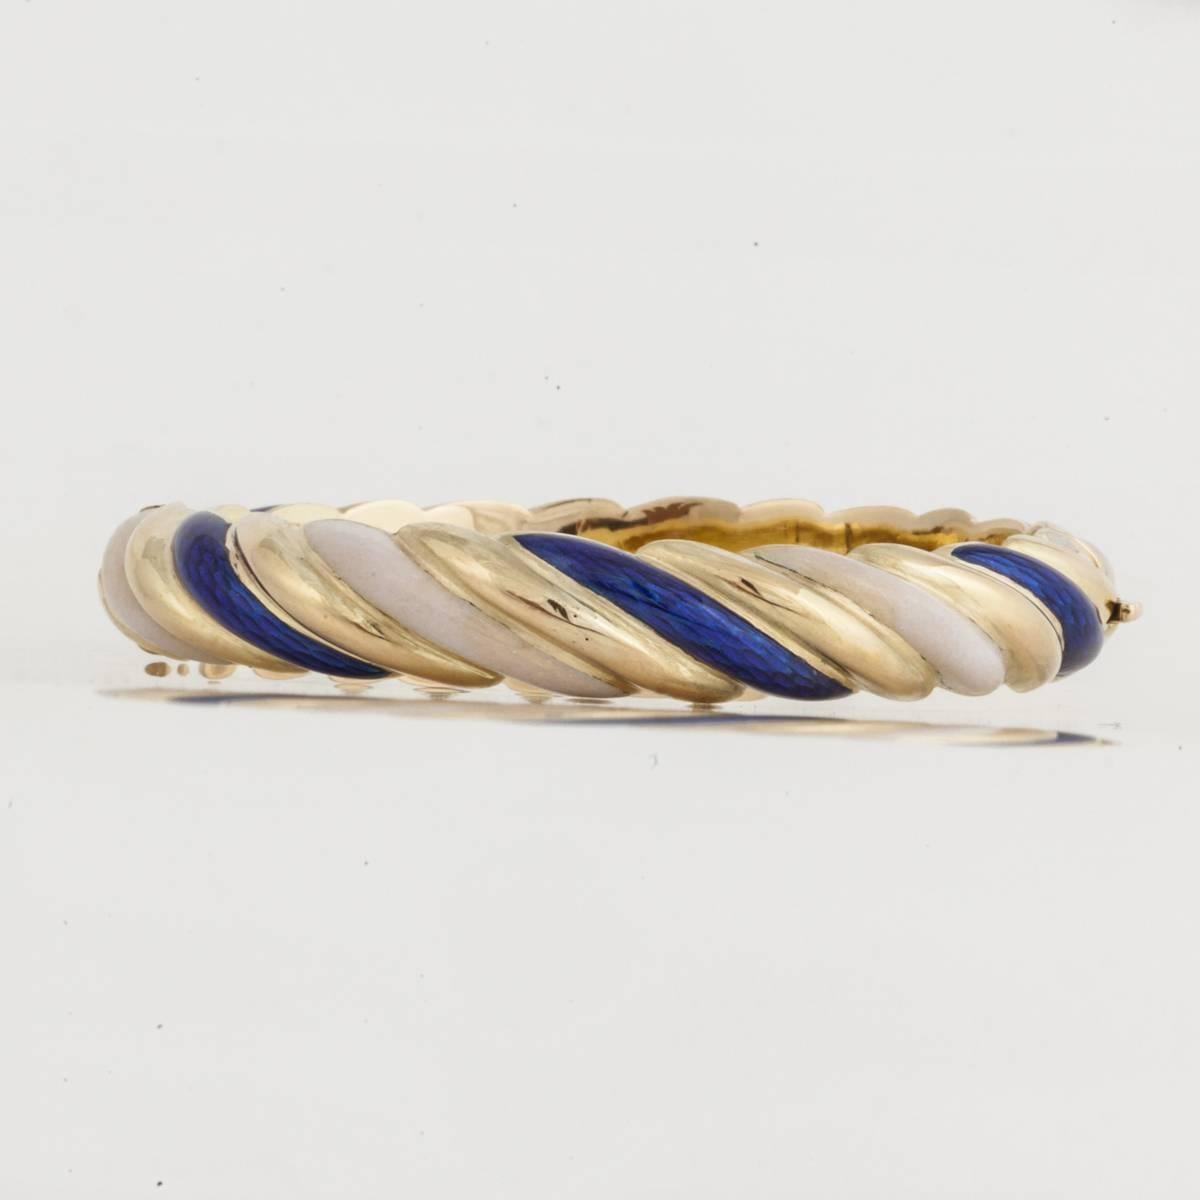 Tiffany & Co. bangle bracelet composed of 18K yellow gold with a rope pattern in alternating blue and white enamel.  The bracelet is marked 